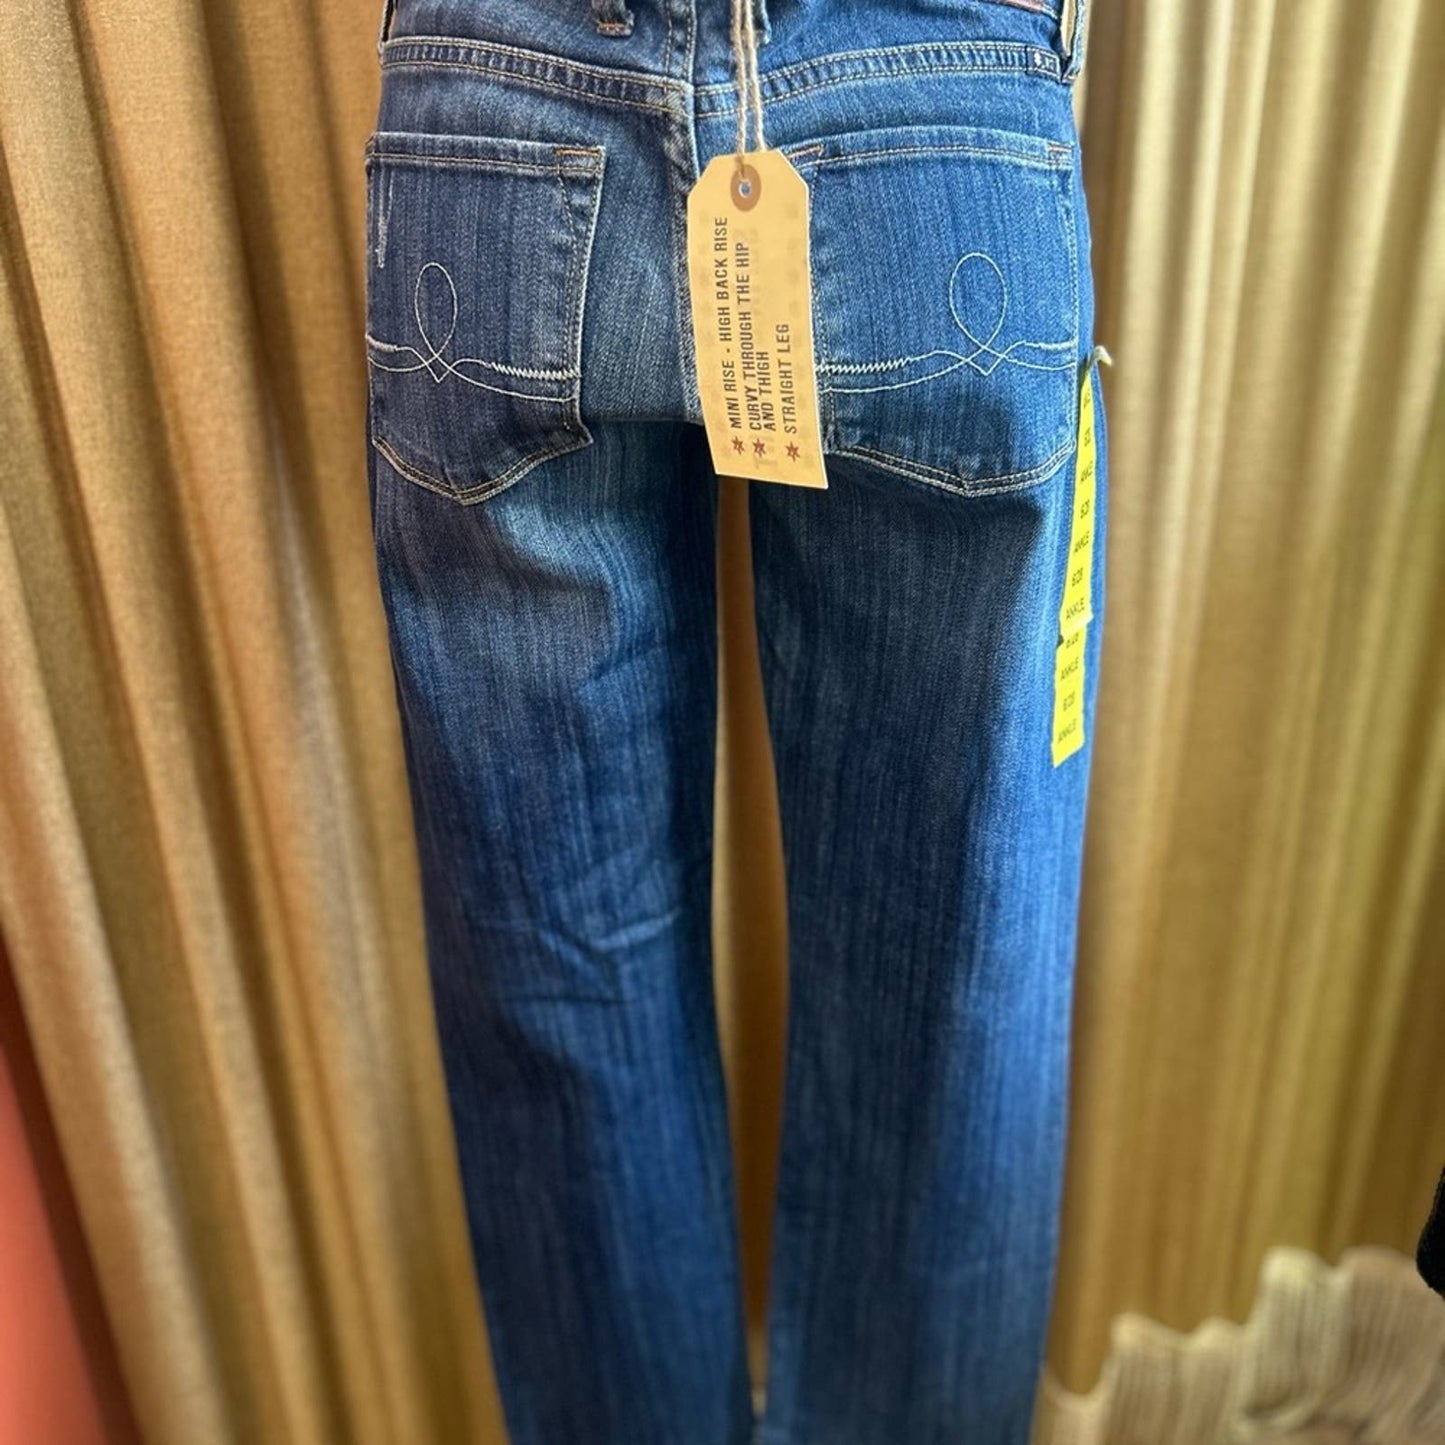 Lucky Brank Ankle Jeans NWT Size 28